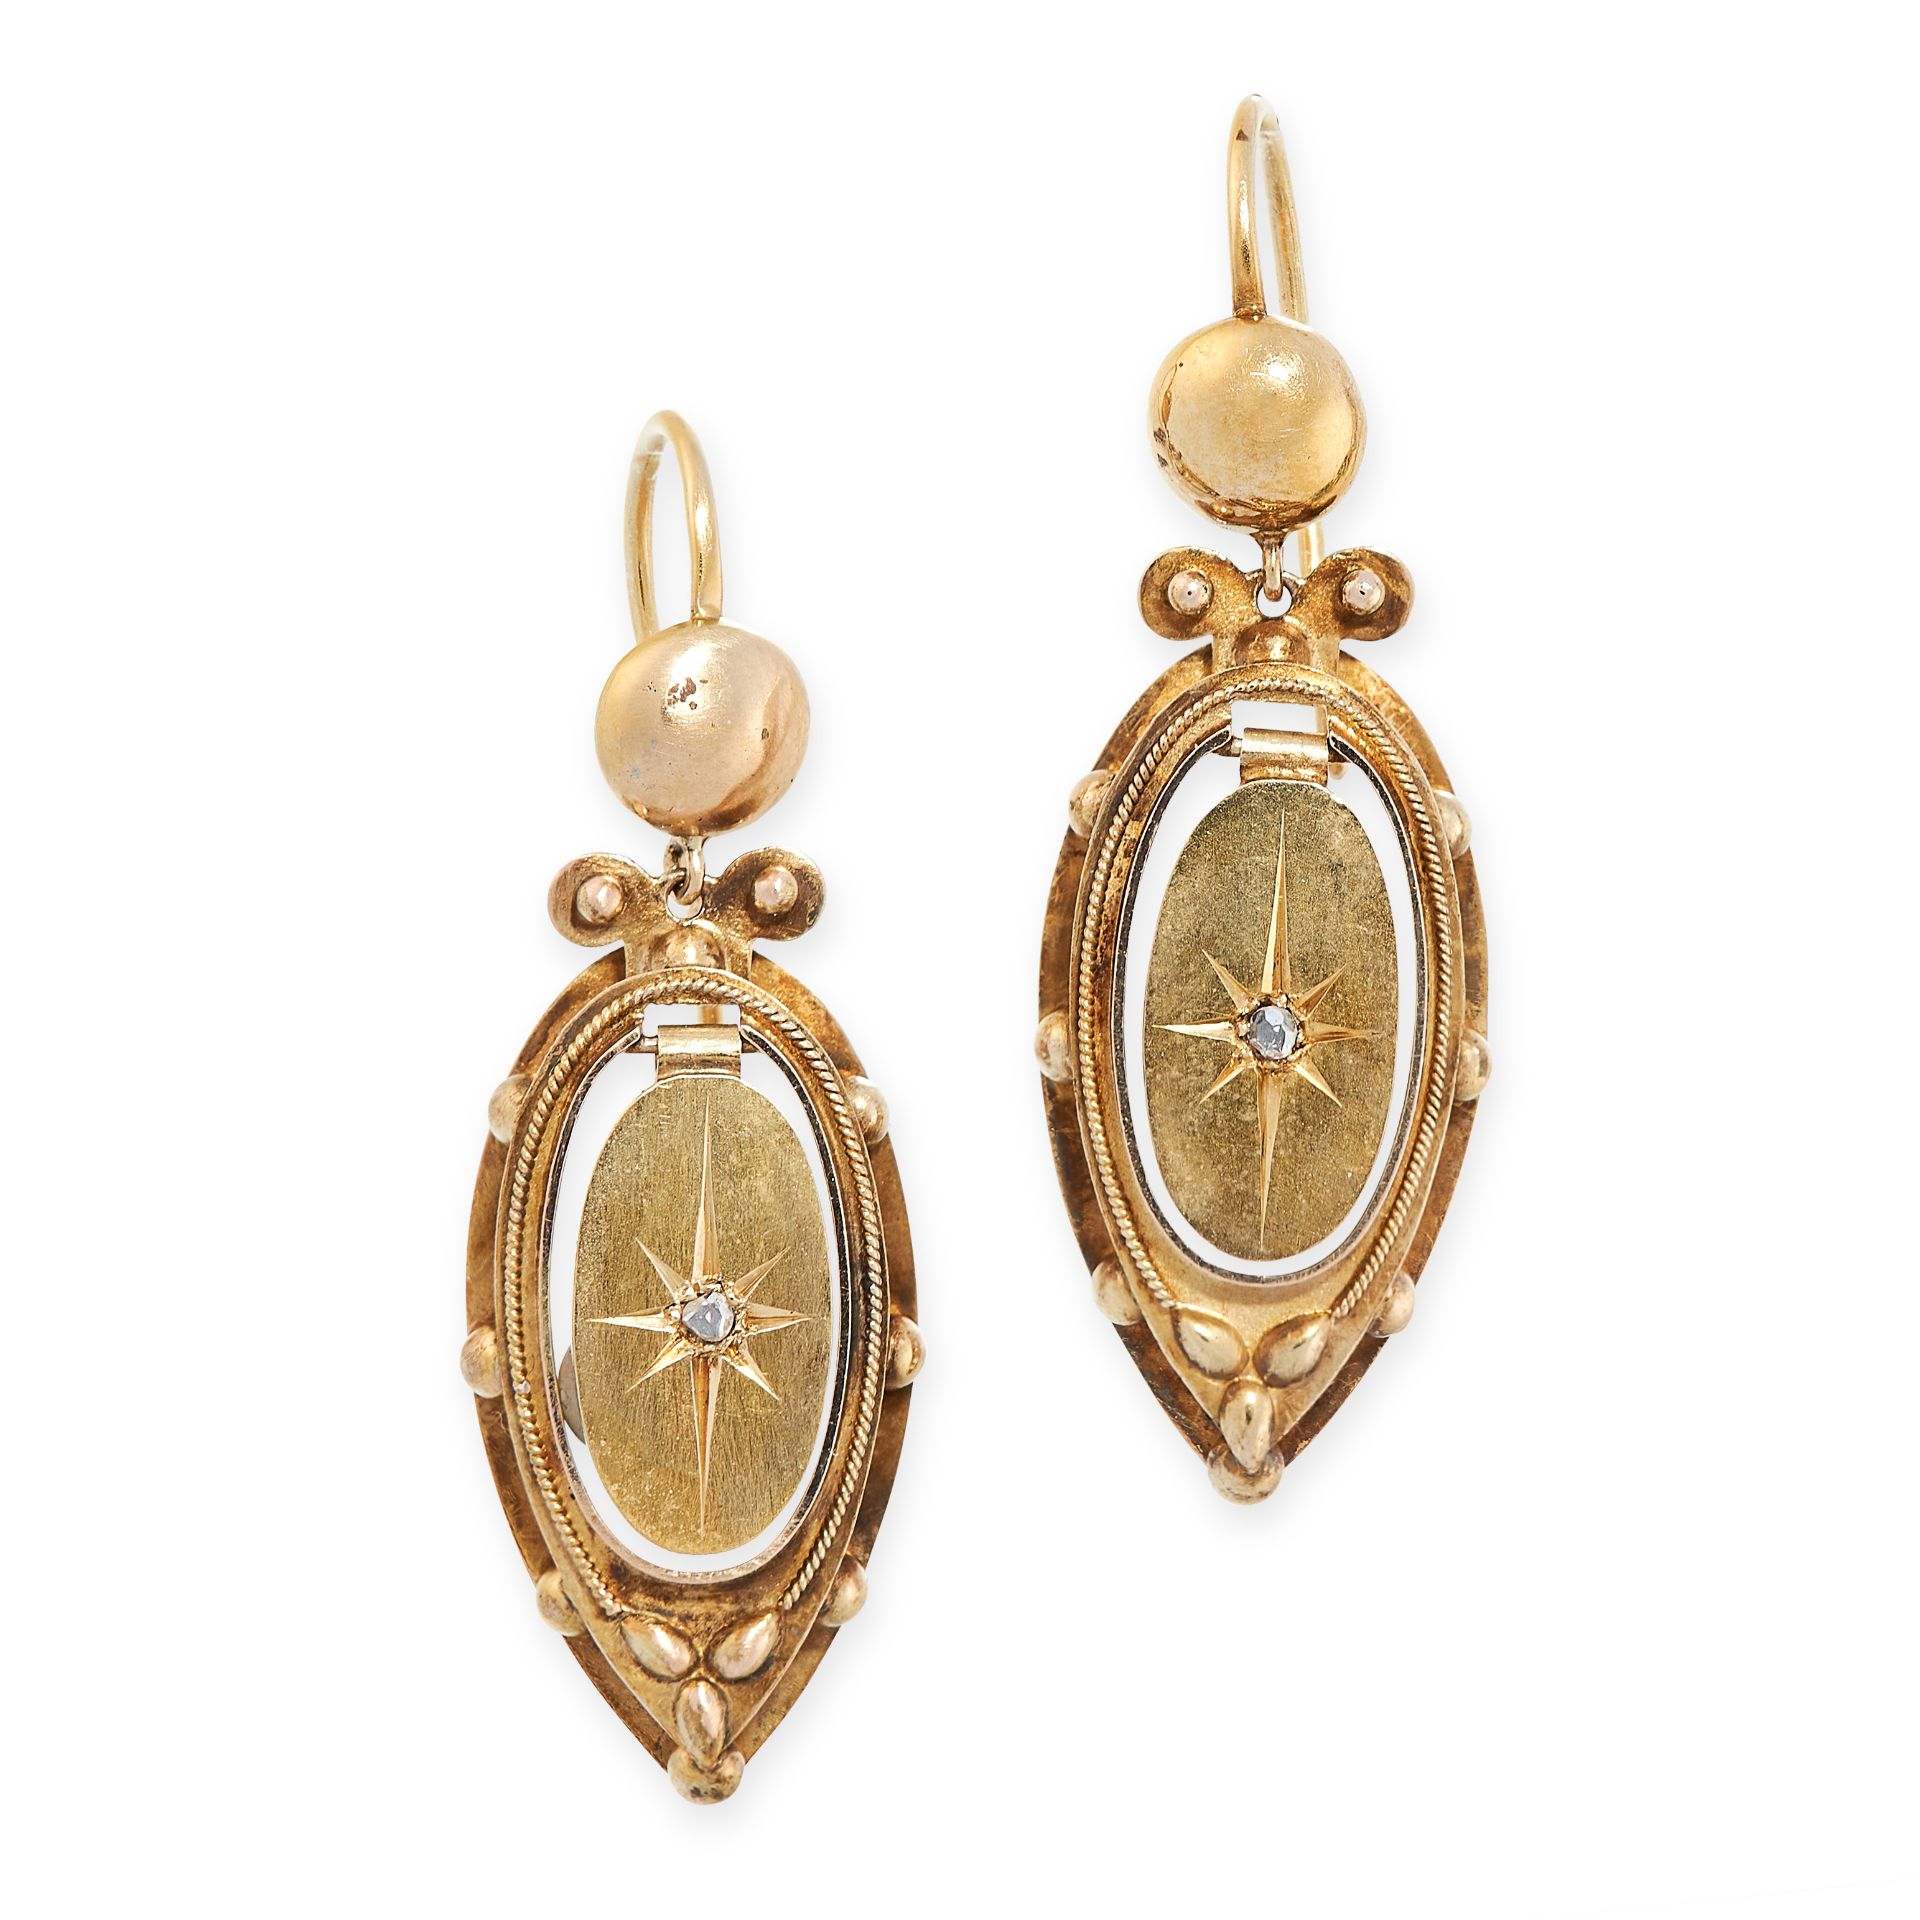 A PAIR OF ANTIQUE DIAMOND EARRINGS, 19TH CENTURY in yellow gold, in the Etruscan revival manner, the